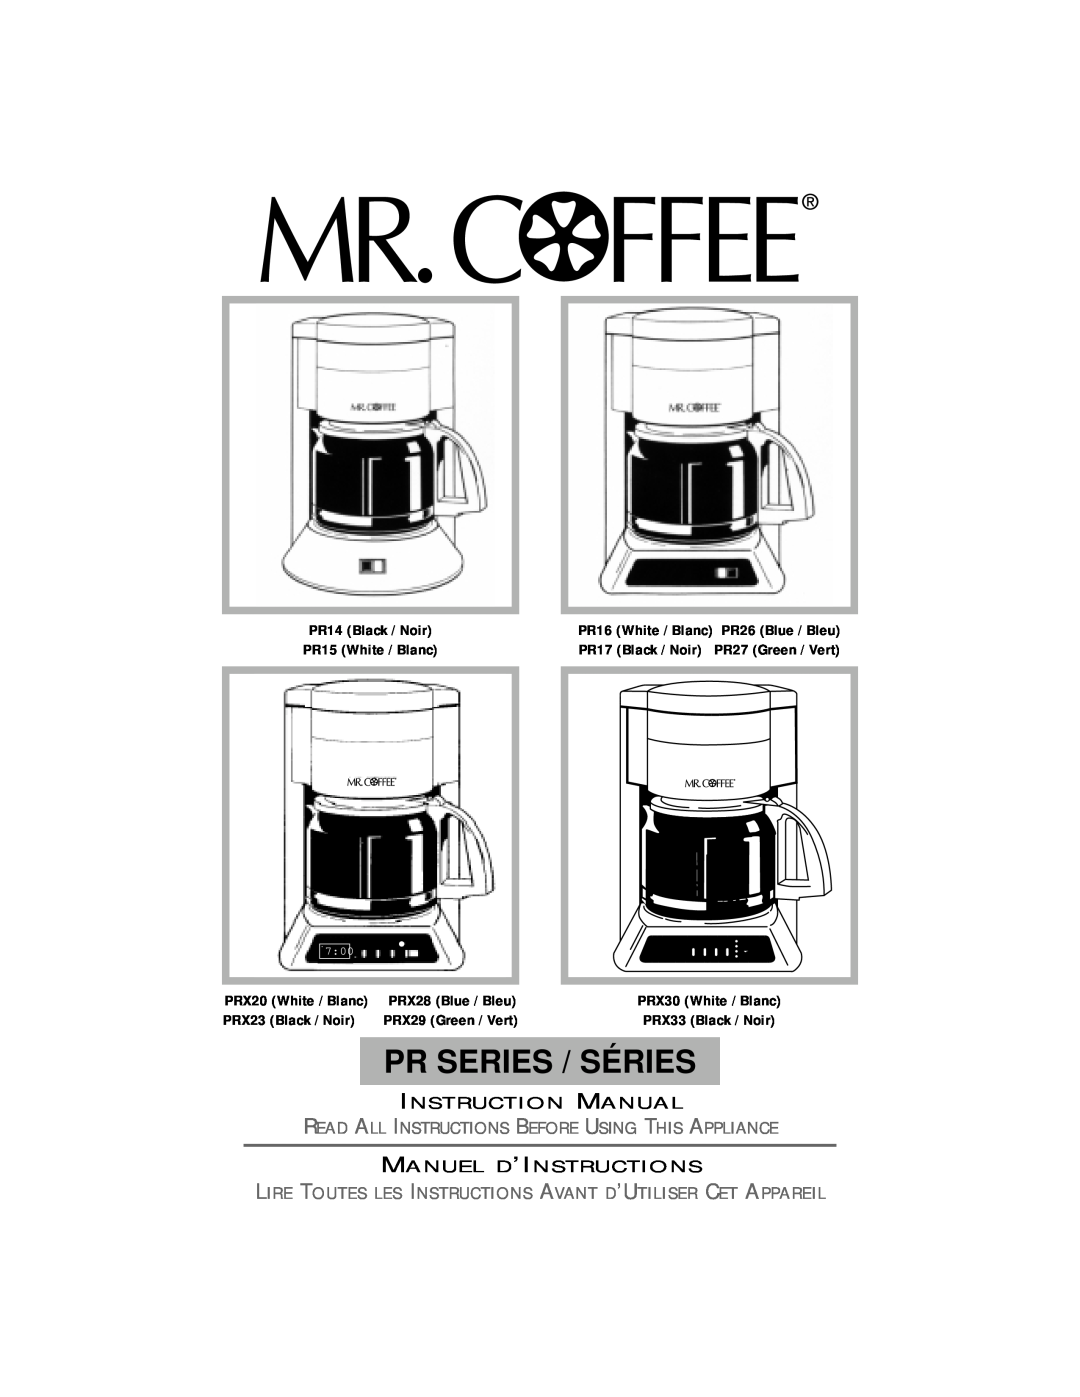 Mr. Coffee PR14, PRX28, PRX33, PR15 instruction manual Pr Series / Séries, Read All Instructions Before Using This Appliance 